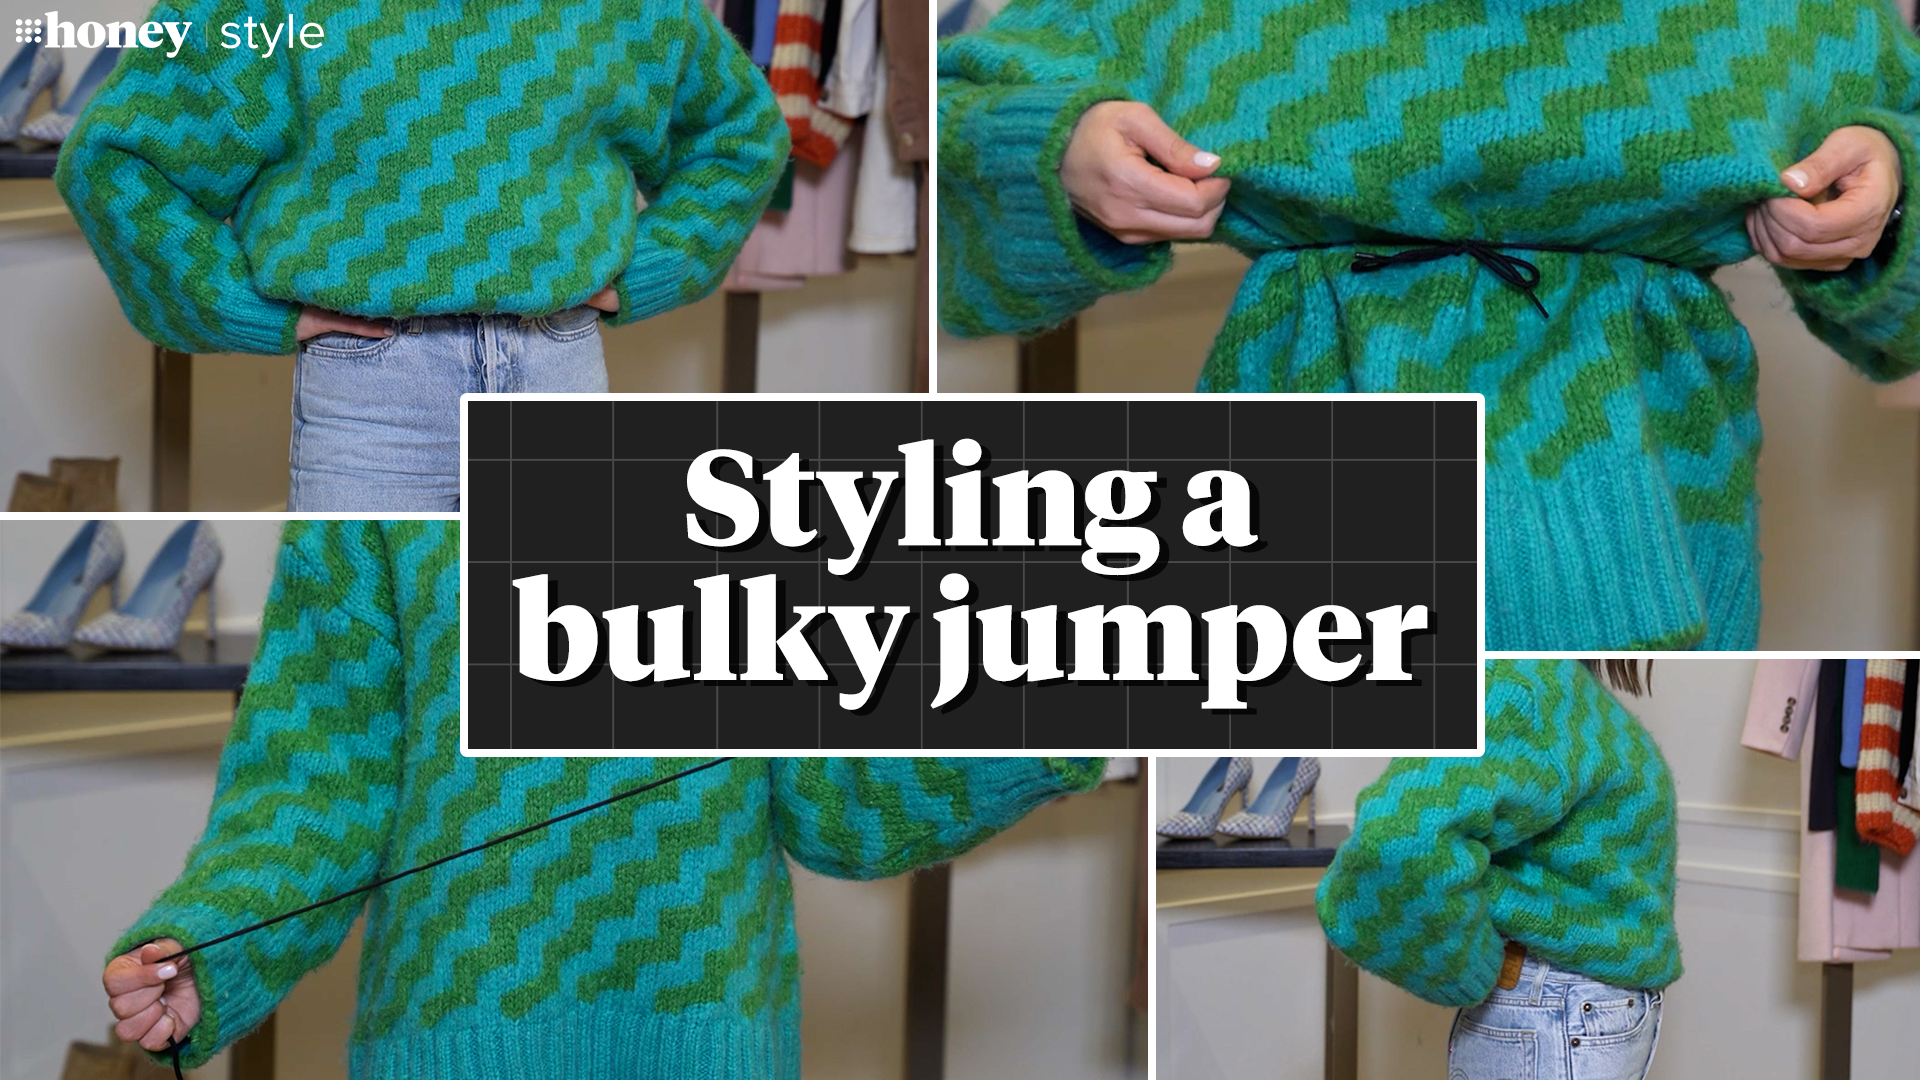 Three clever ways to style a bulky jumper